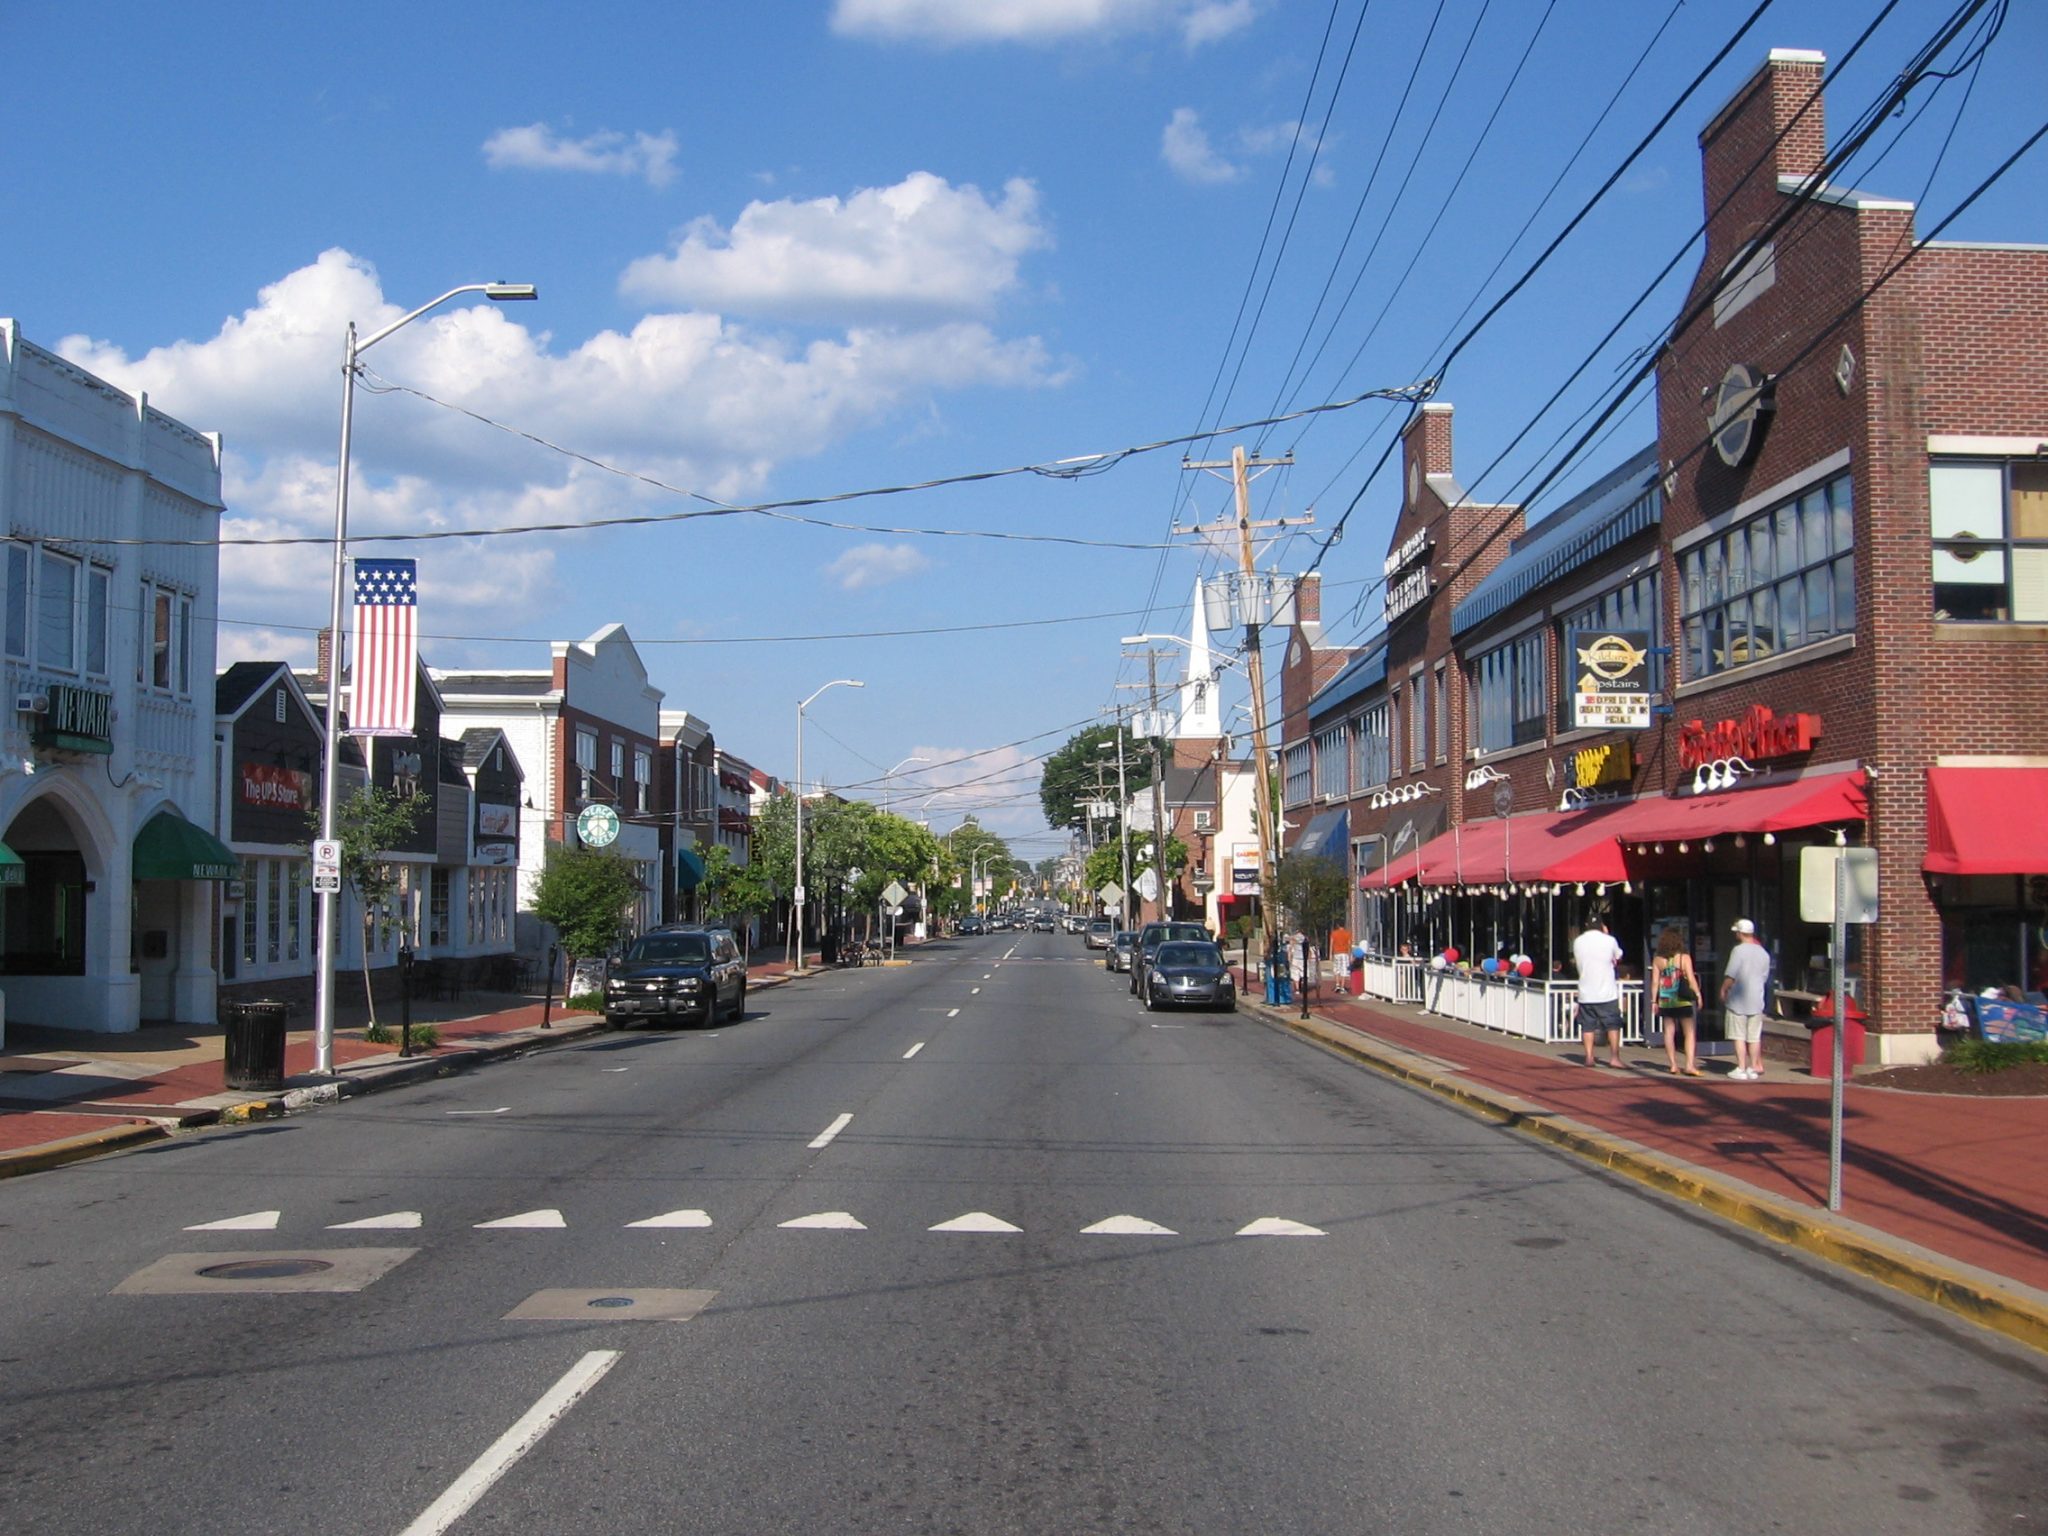 Eye-level view of a street and buildings in Newark Delaware